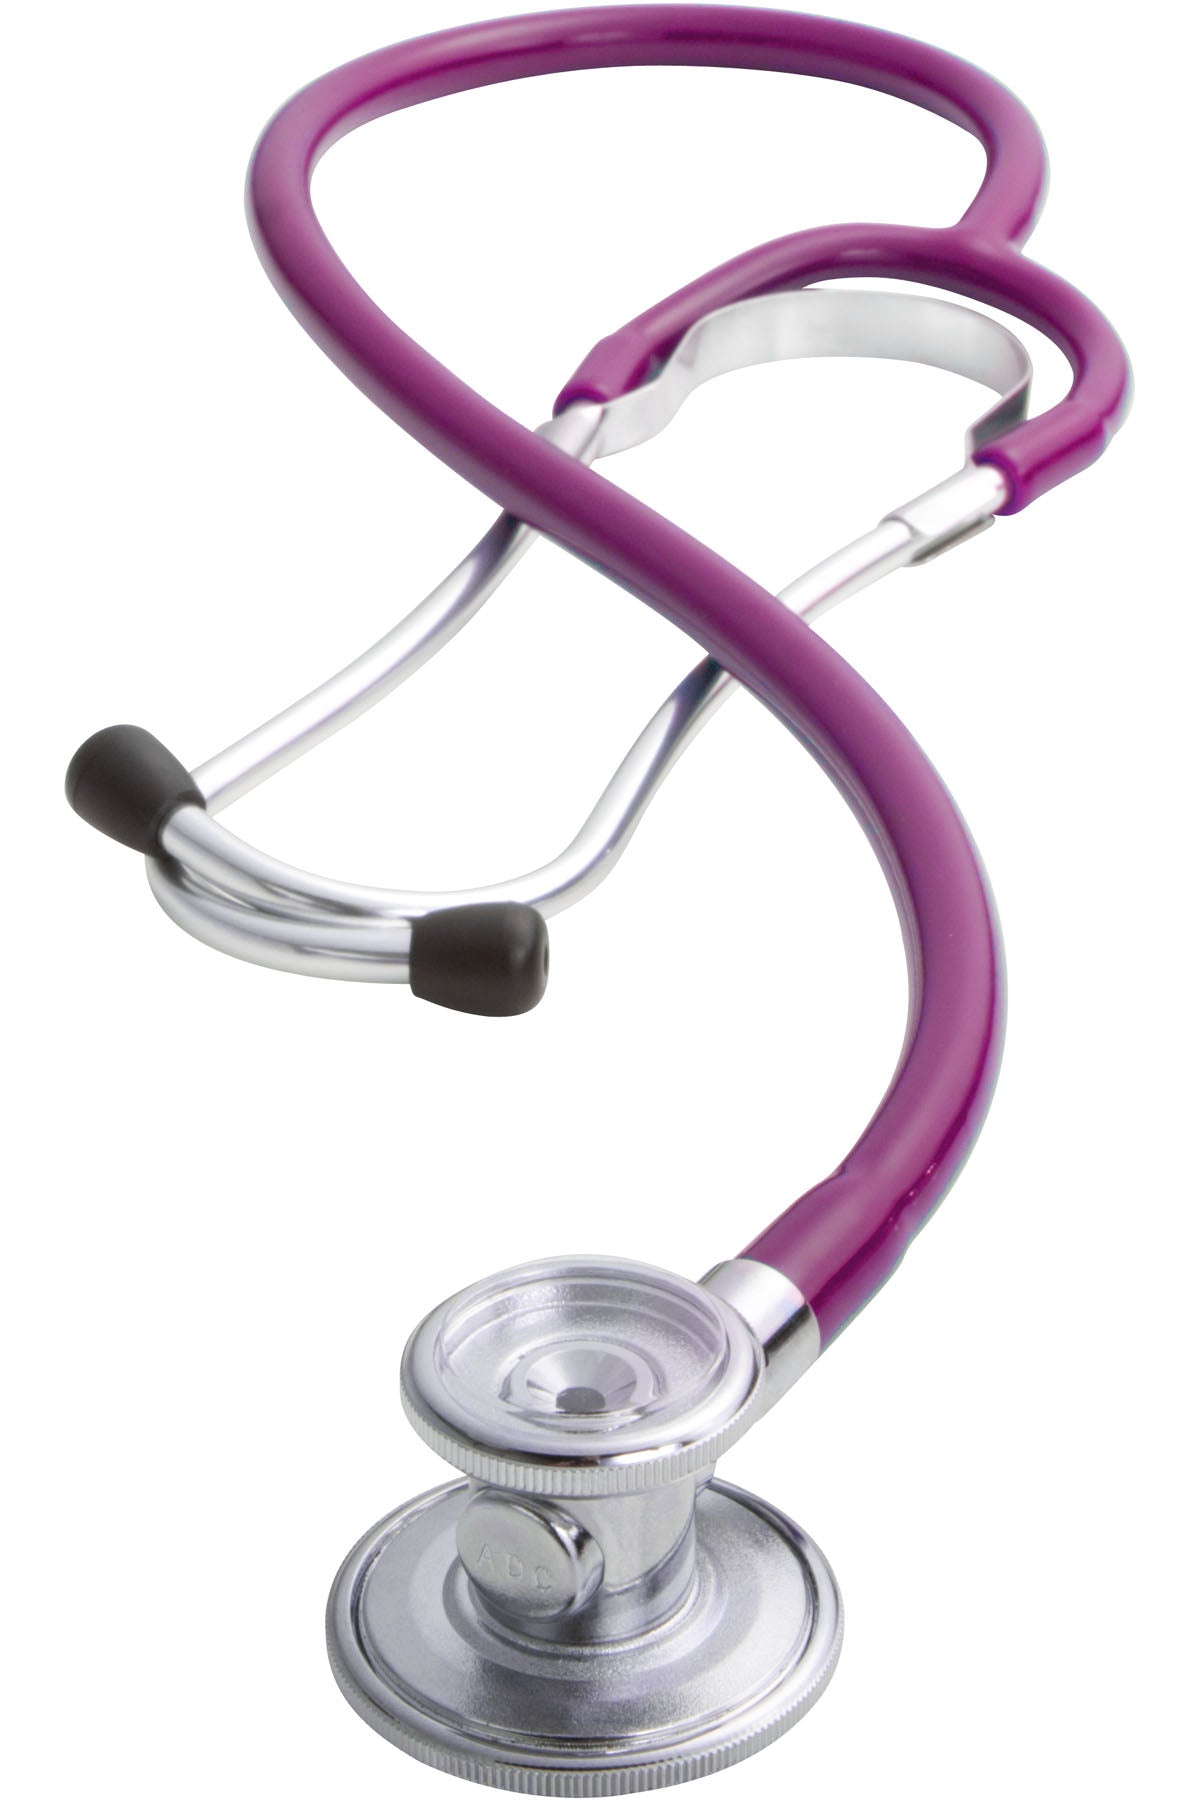 ADC Hot Pink Stethoscope